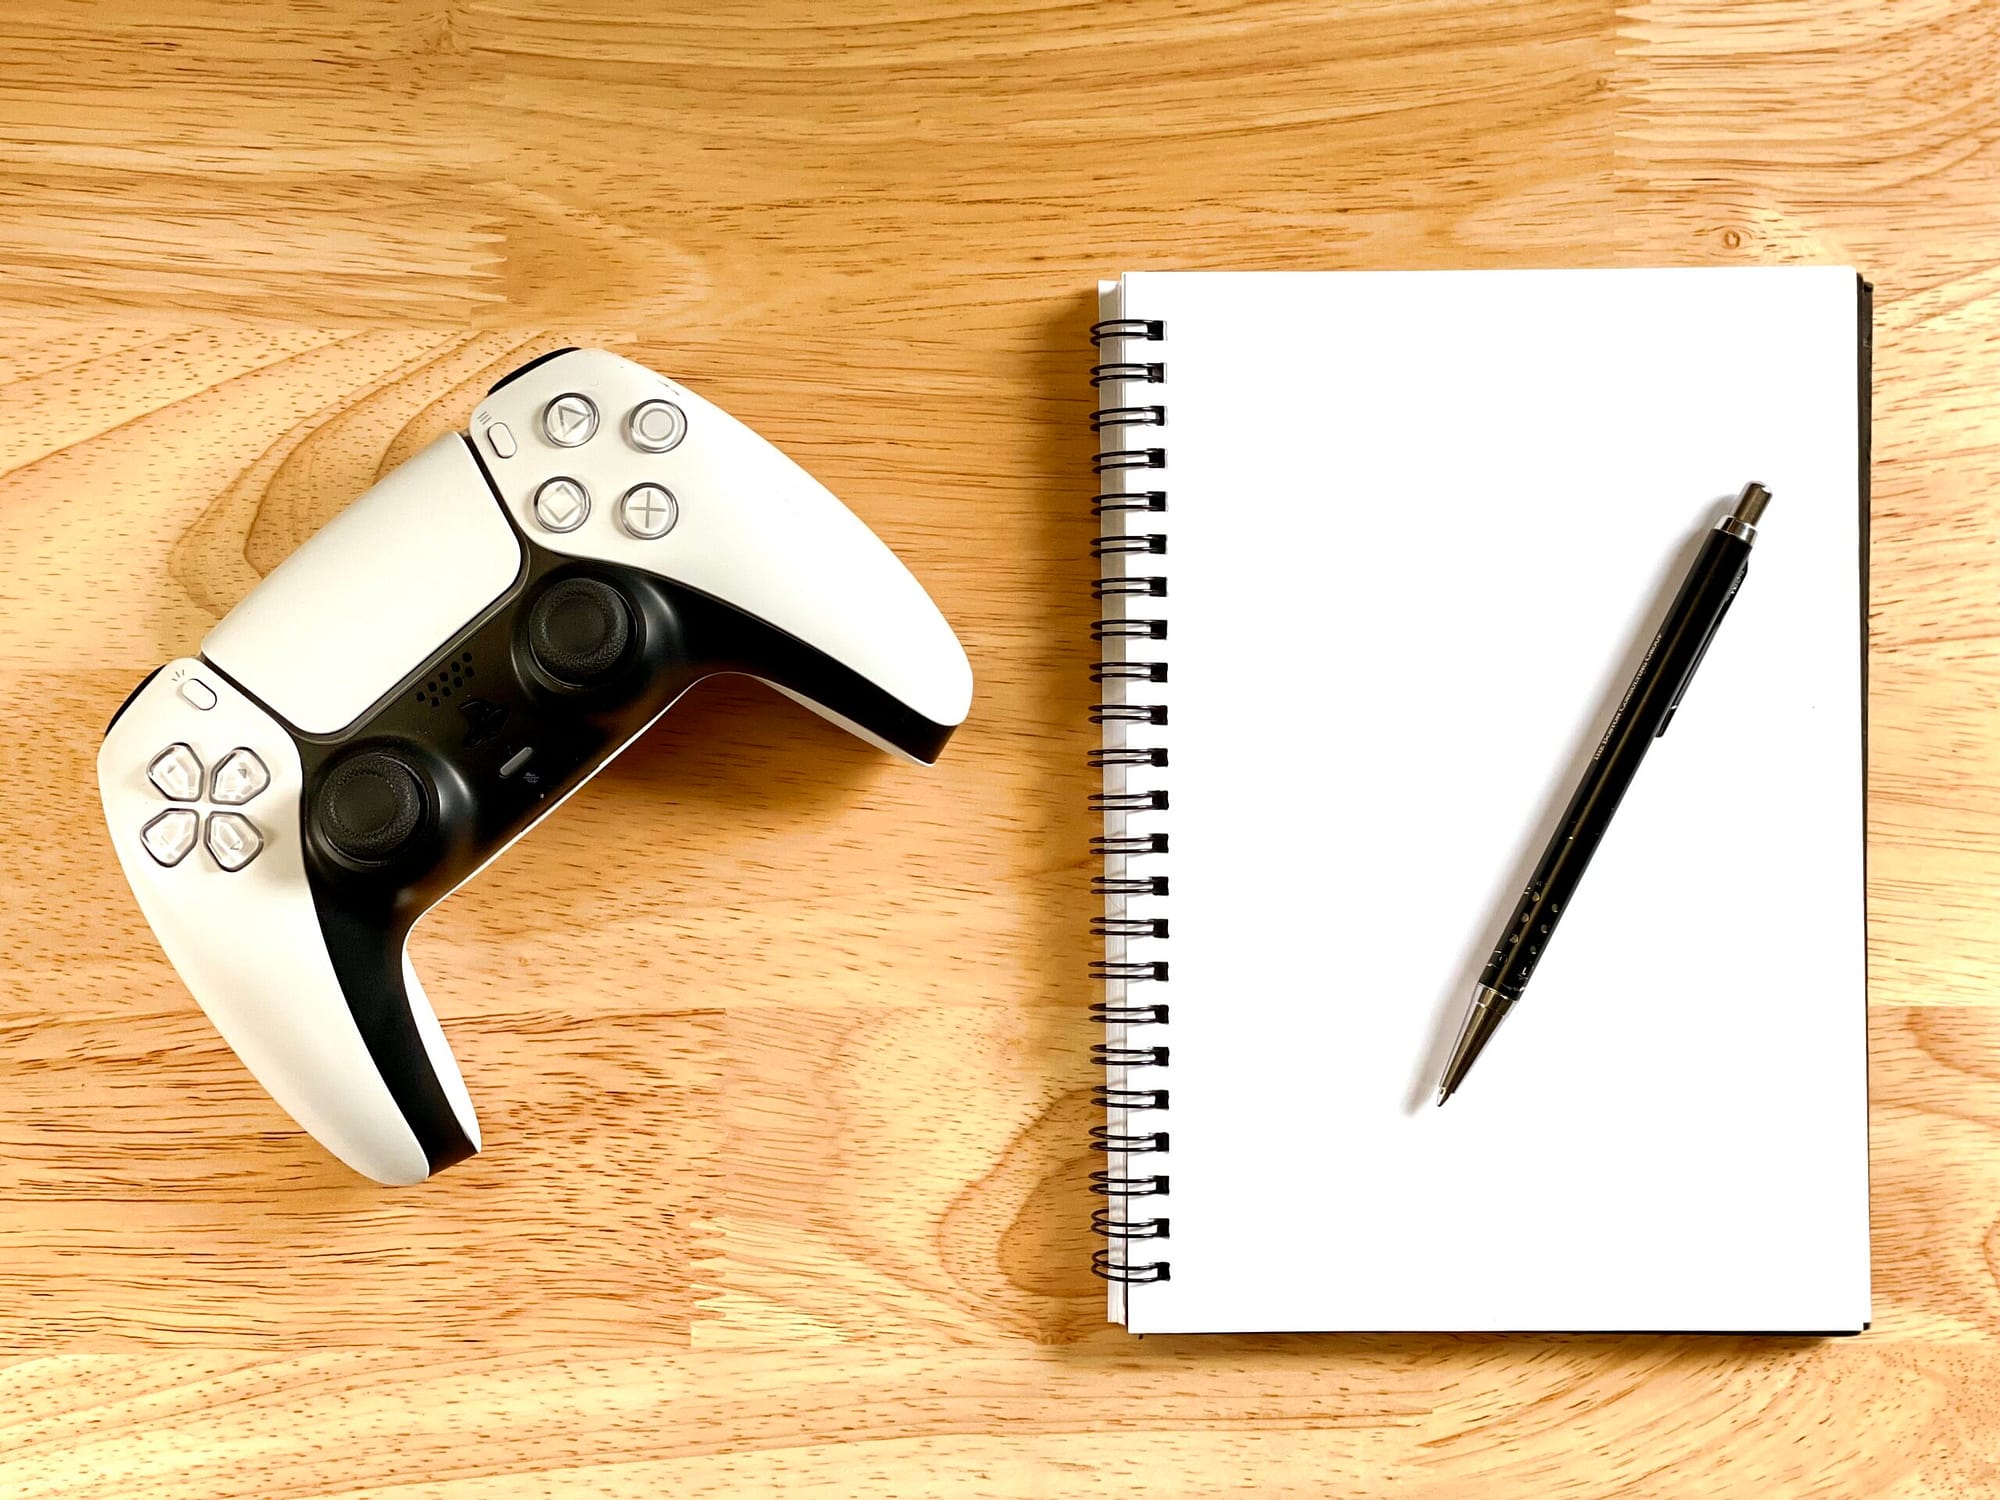 The indispensable writing strategy I learned from gaming